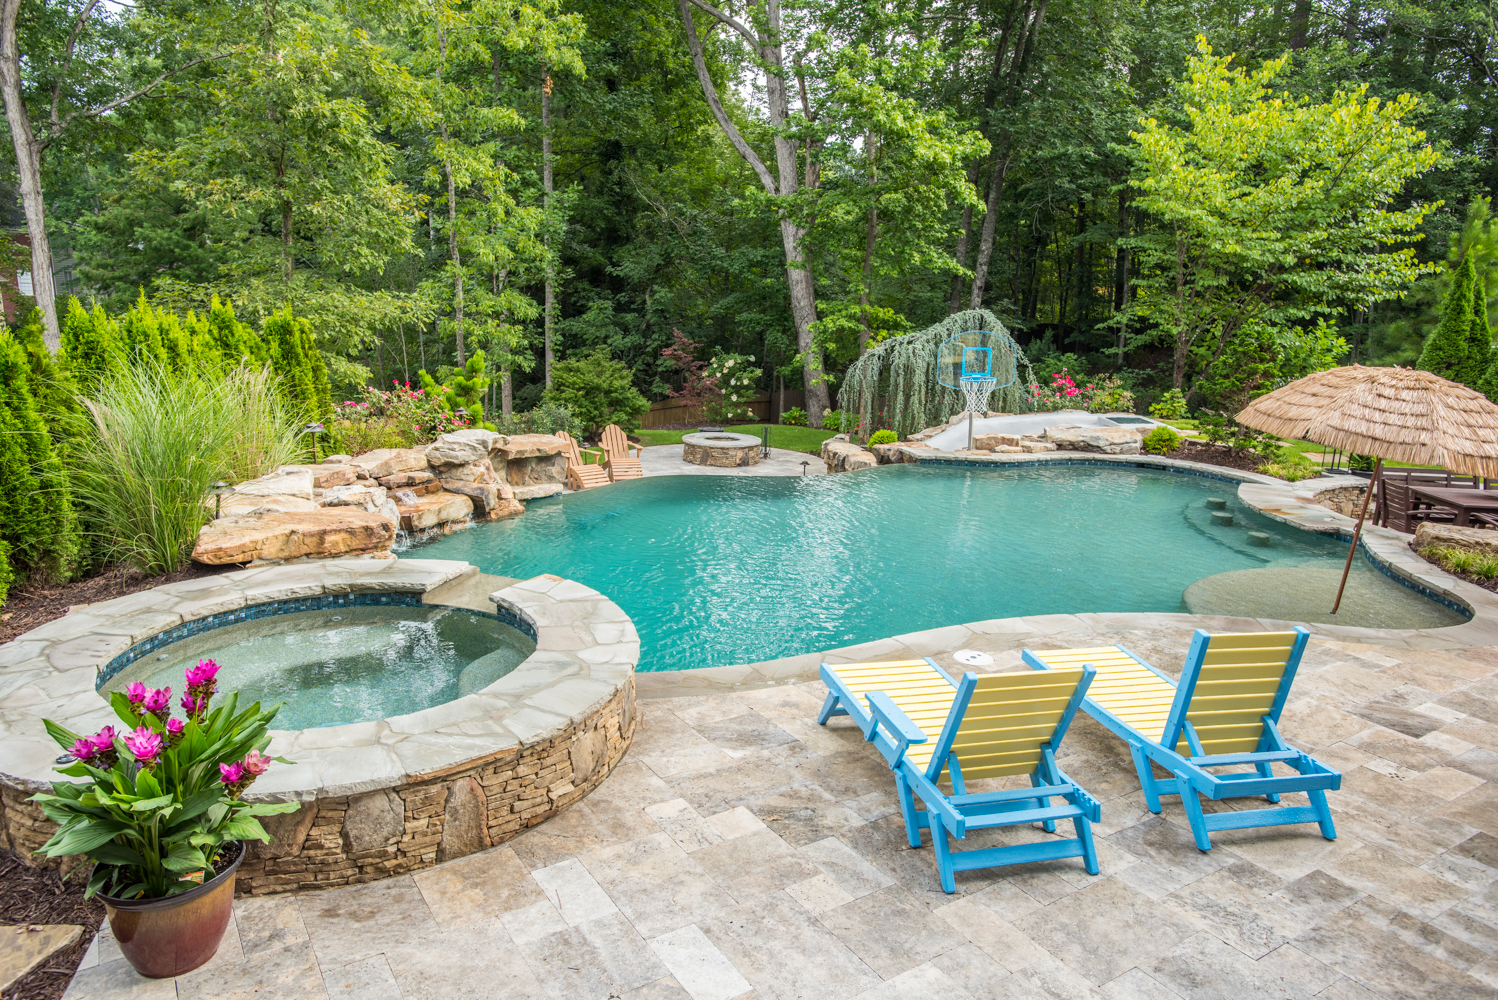 A custom freeform pool with a spa and swim-up bar surrounded by lounge chairs.